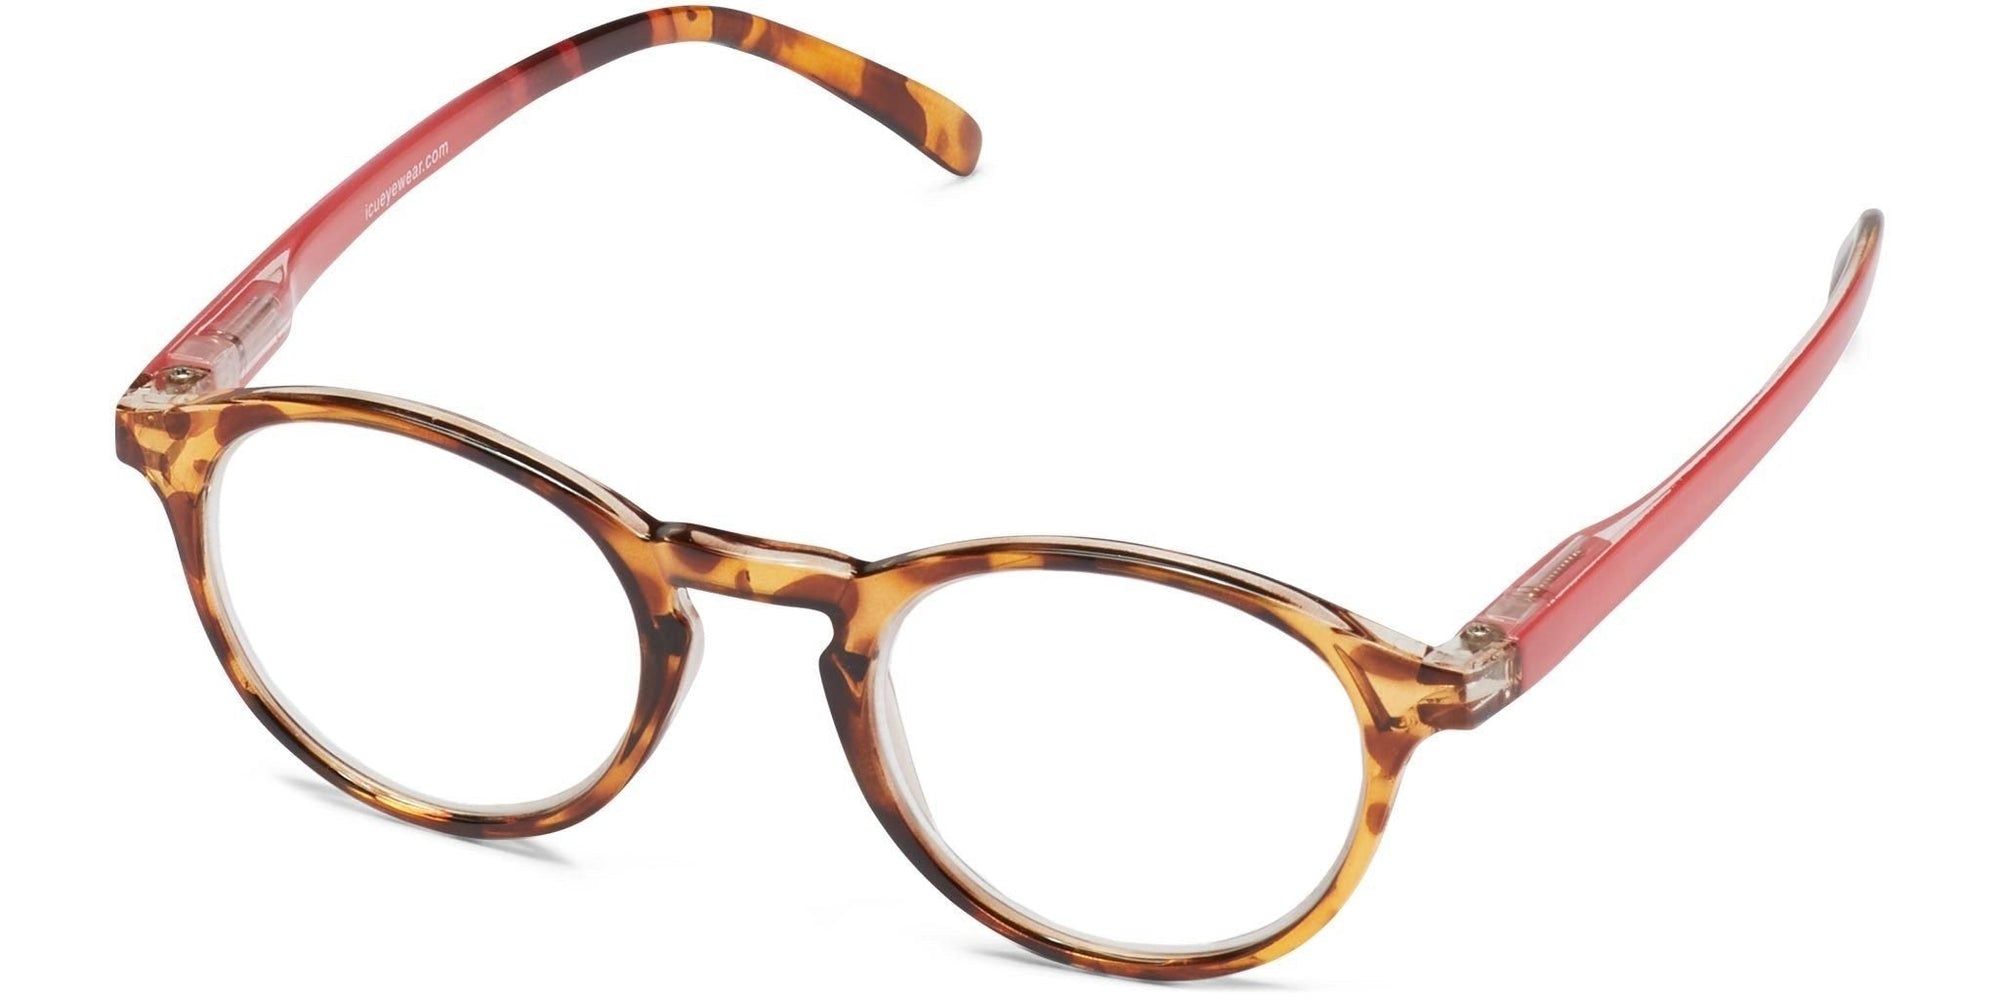 Taylor - Tortoise with Pomegranate / 1.25 - Reading Glasses